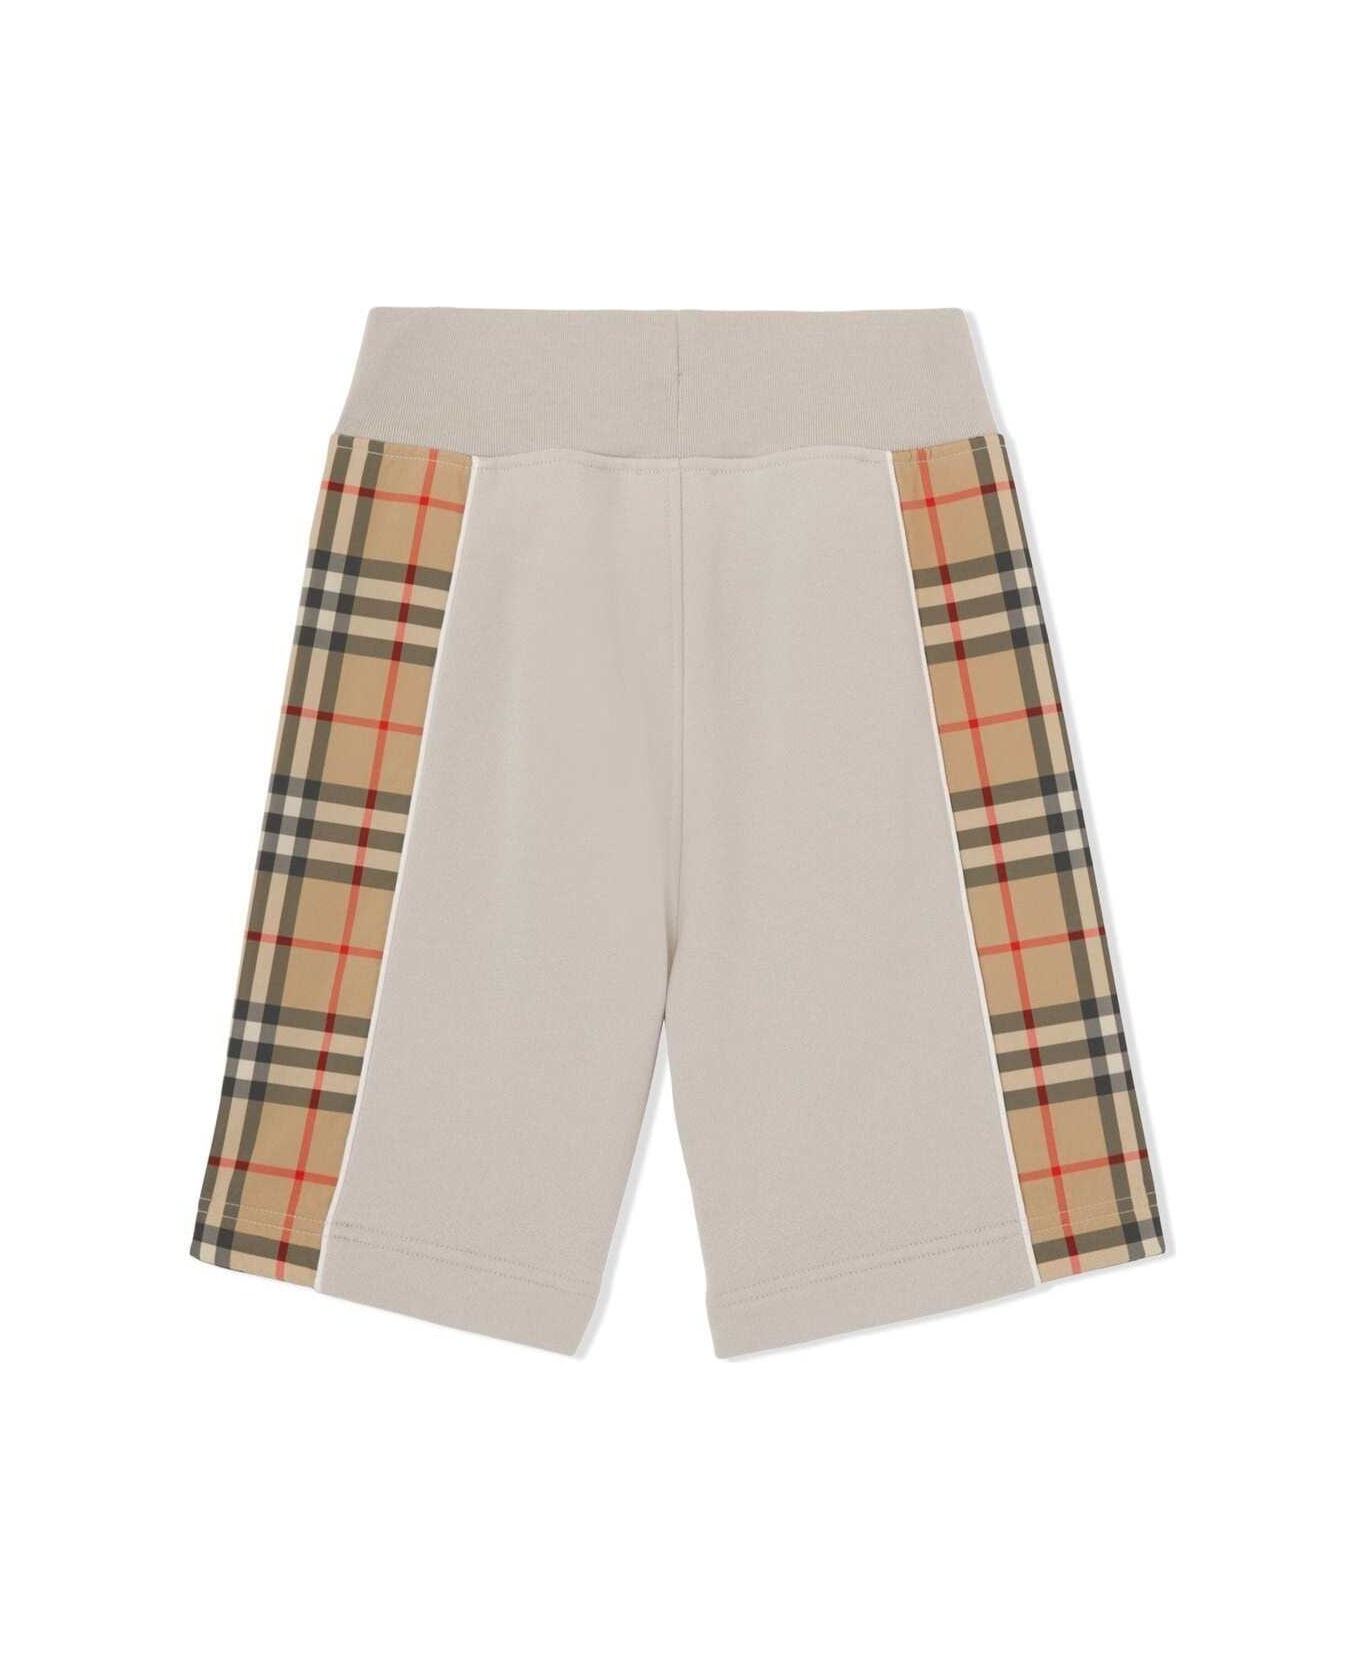 Burberry Beige Bermuda Shors With Vintgage Check Motif In Cotton Kids - Grey ボトムス